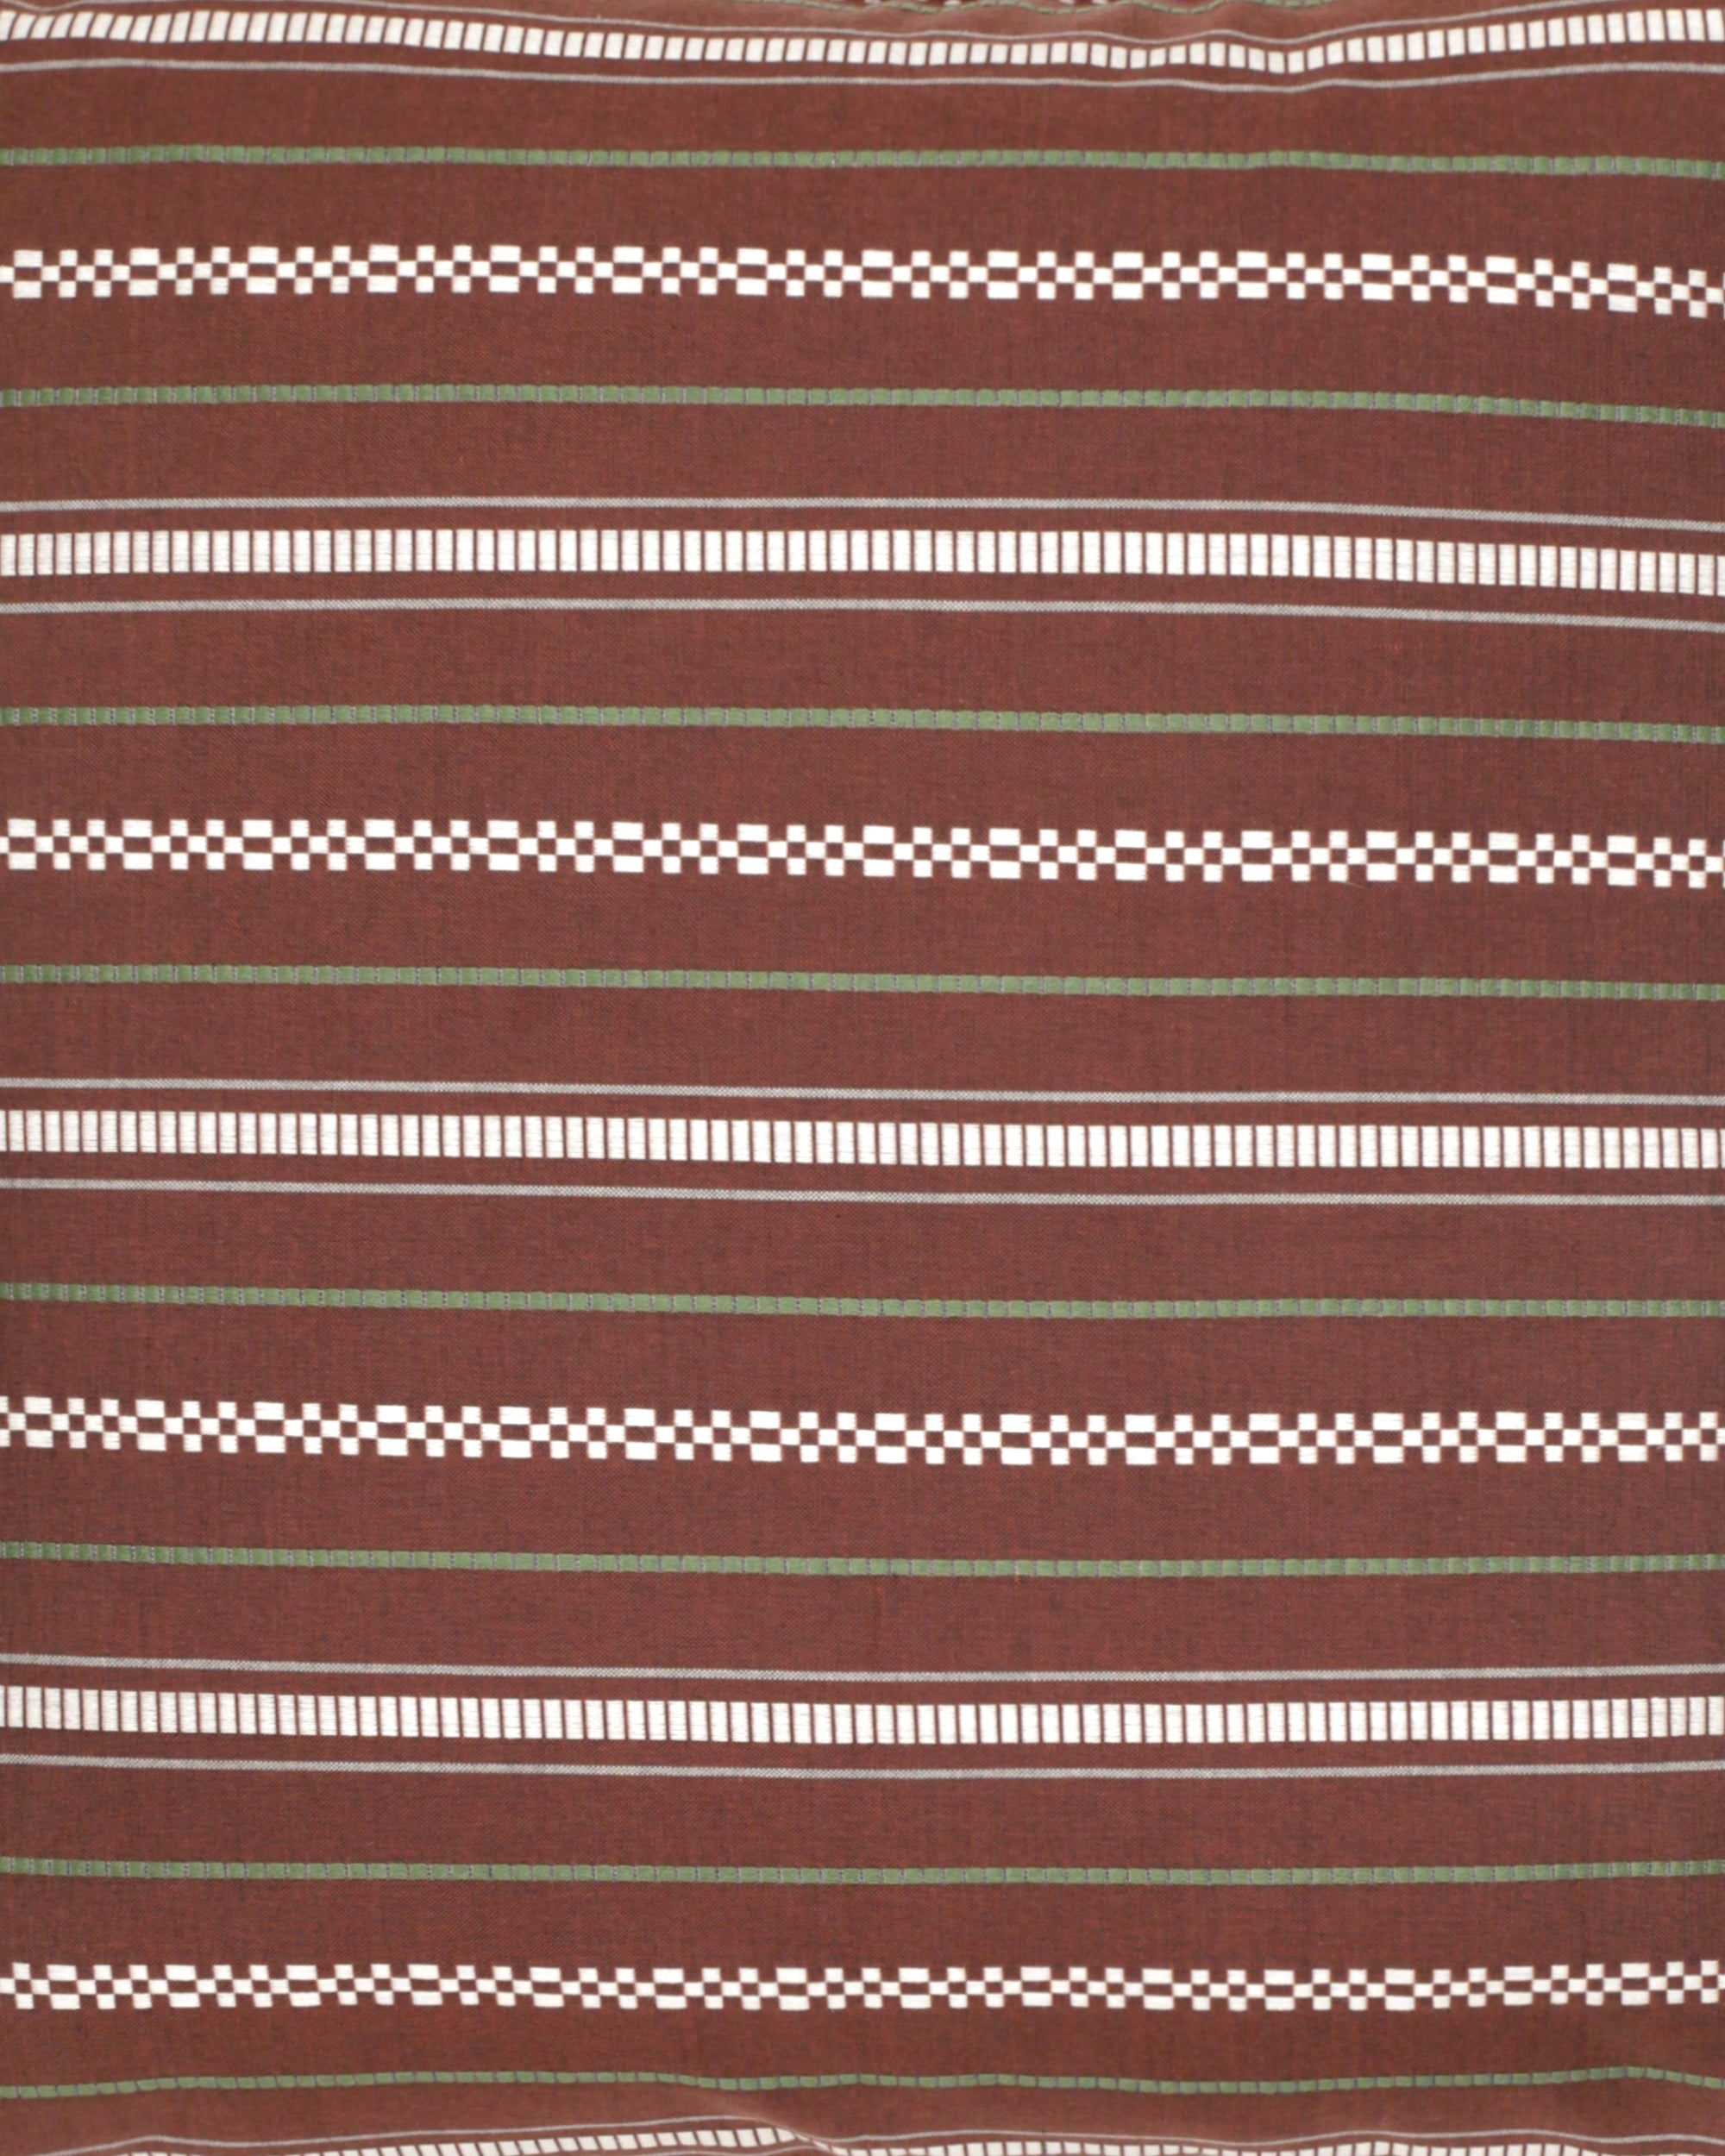 Woven Horizontal Stripe Square Cushion - Russet Red